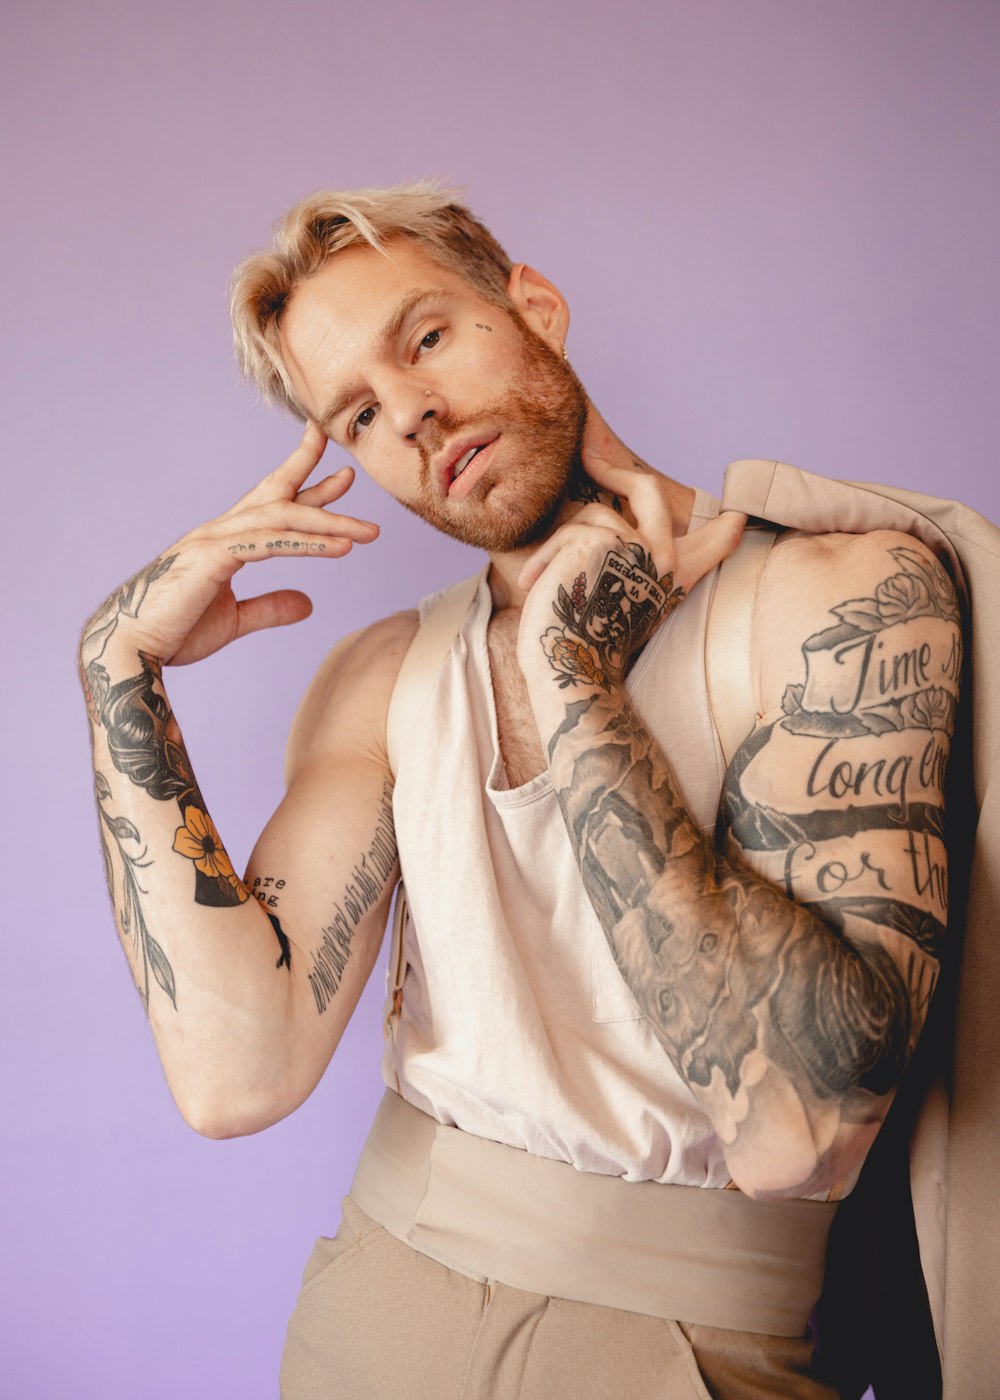 a man with tattoos posing for a picture